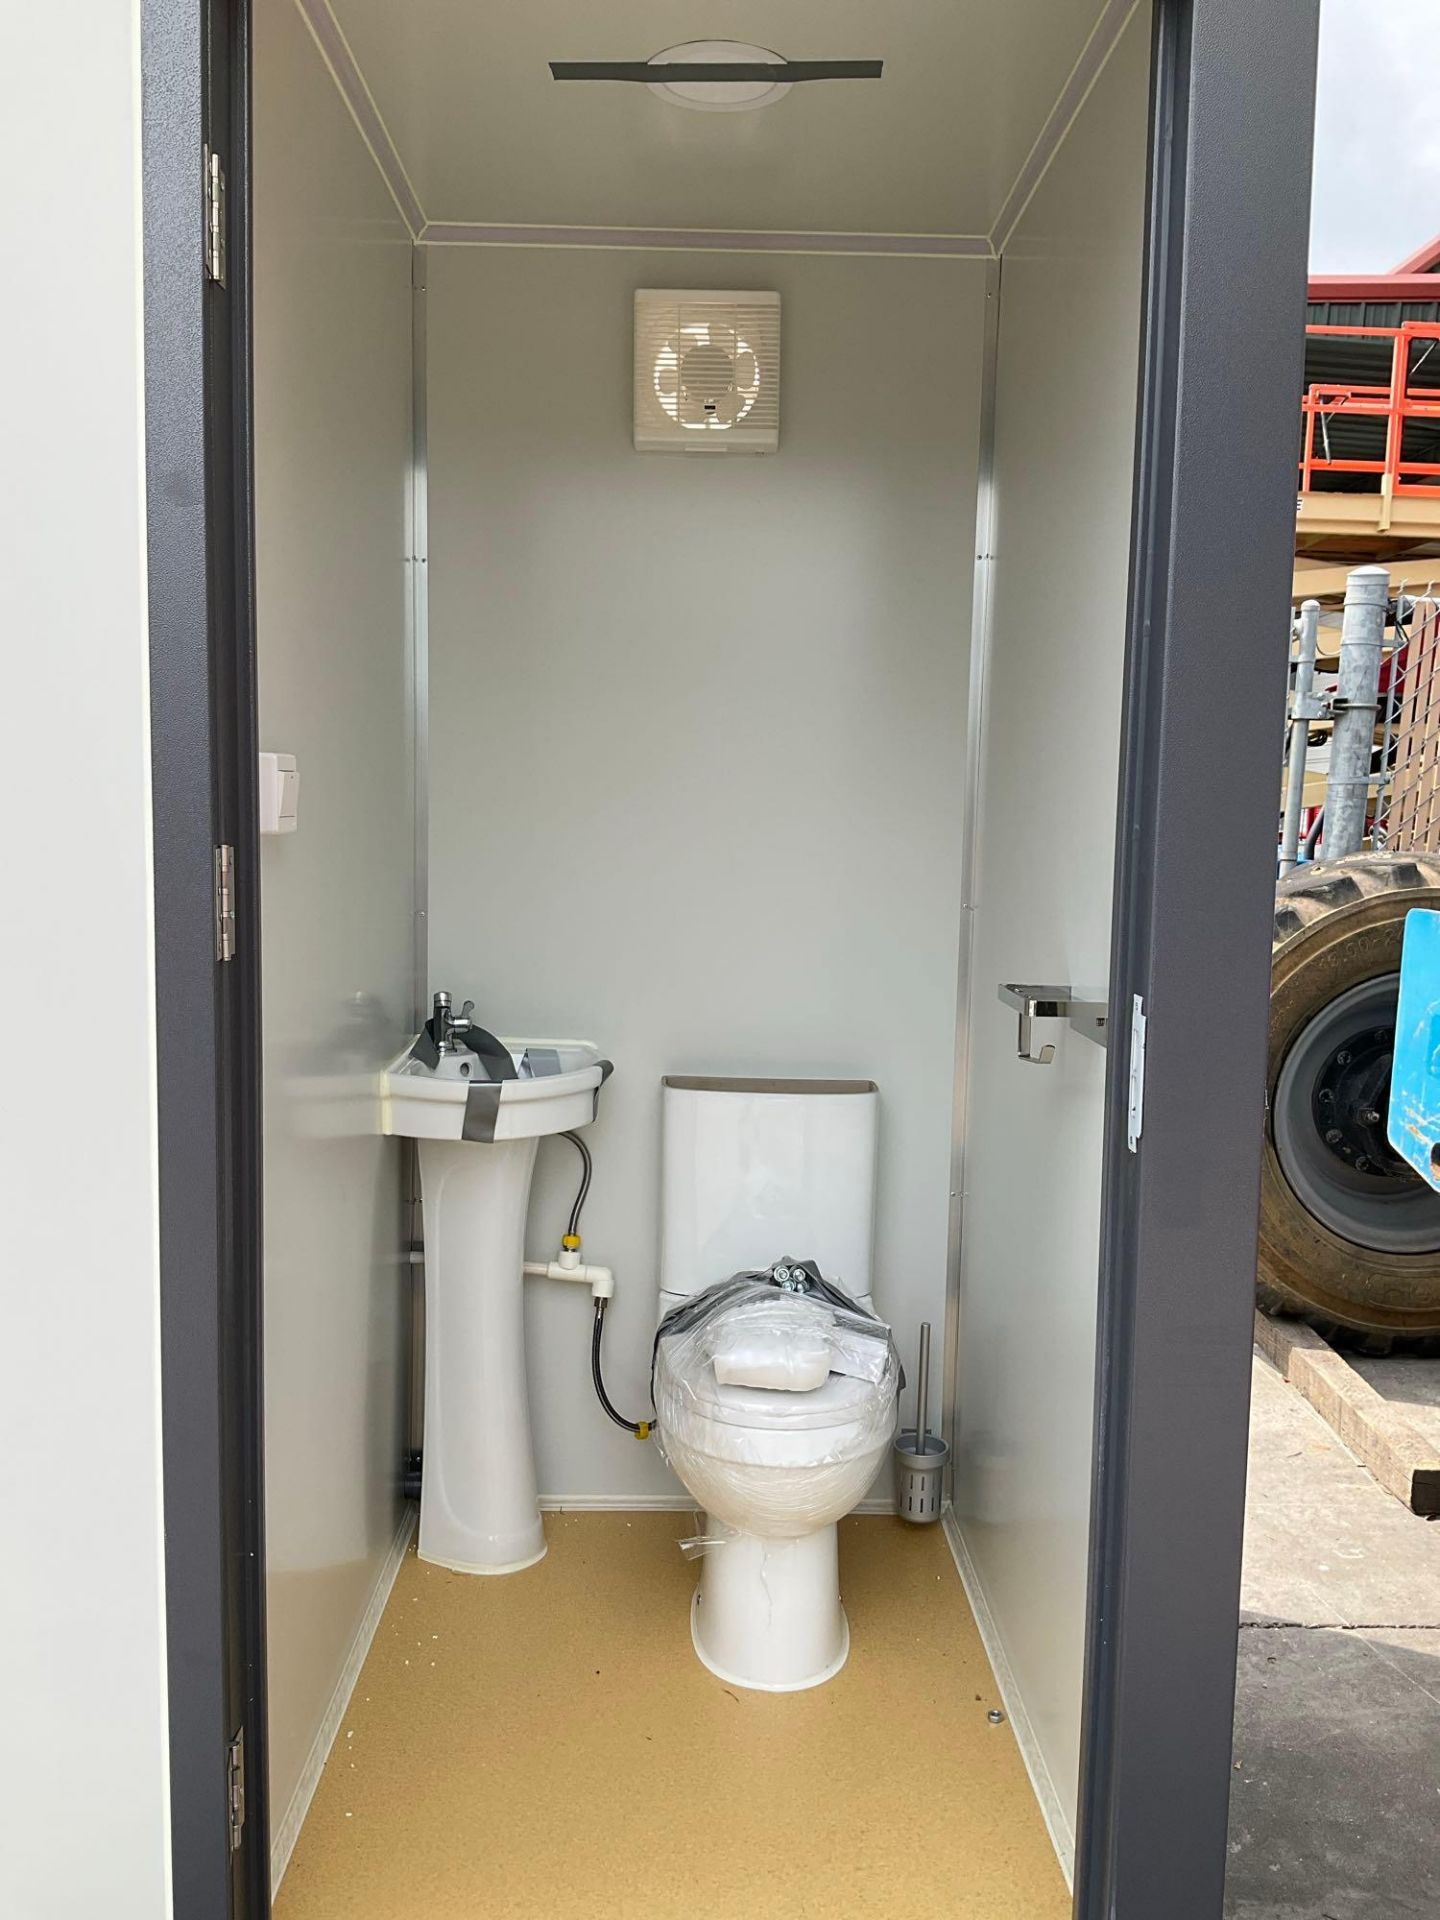 UNUSED PORTABLE DOUBLE BATHROOM UNIT, 2 STALLS, ELECTRIC & PLUMBING HOOK UP WITH EXTERIOR PLUMBIN... - Image 13 of 14